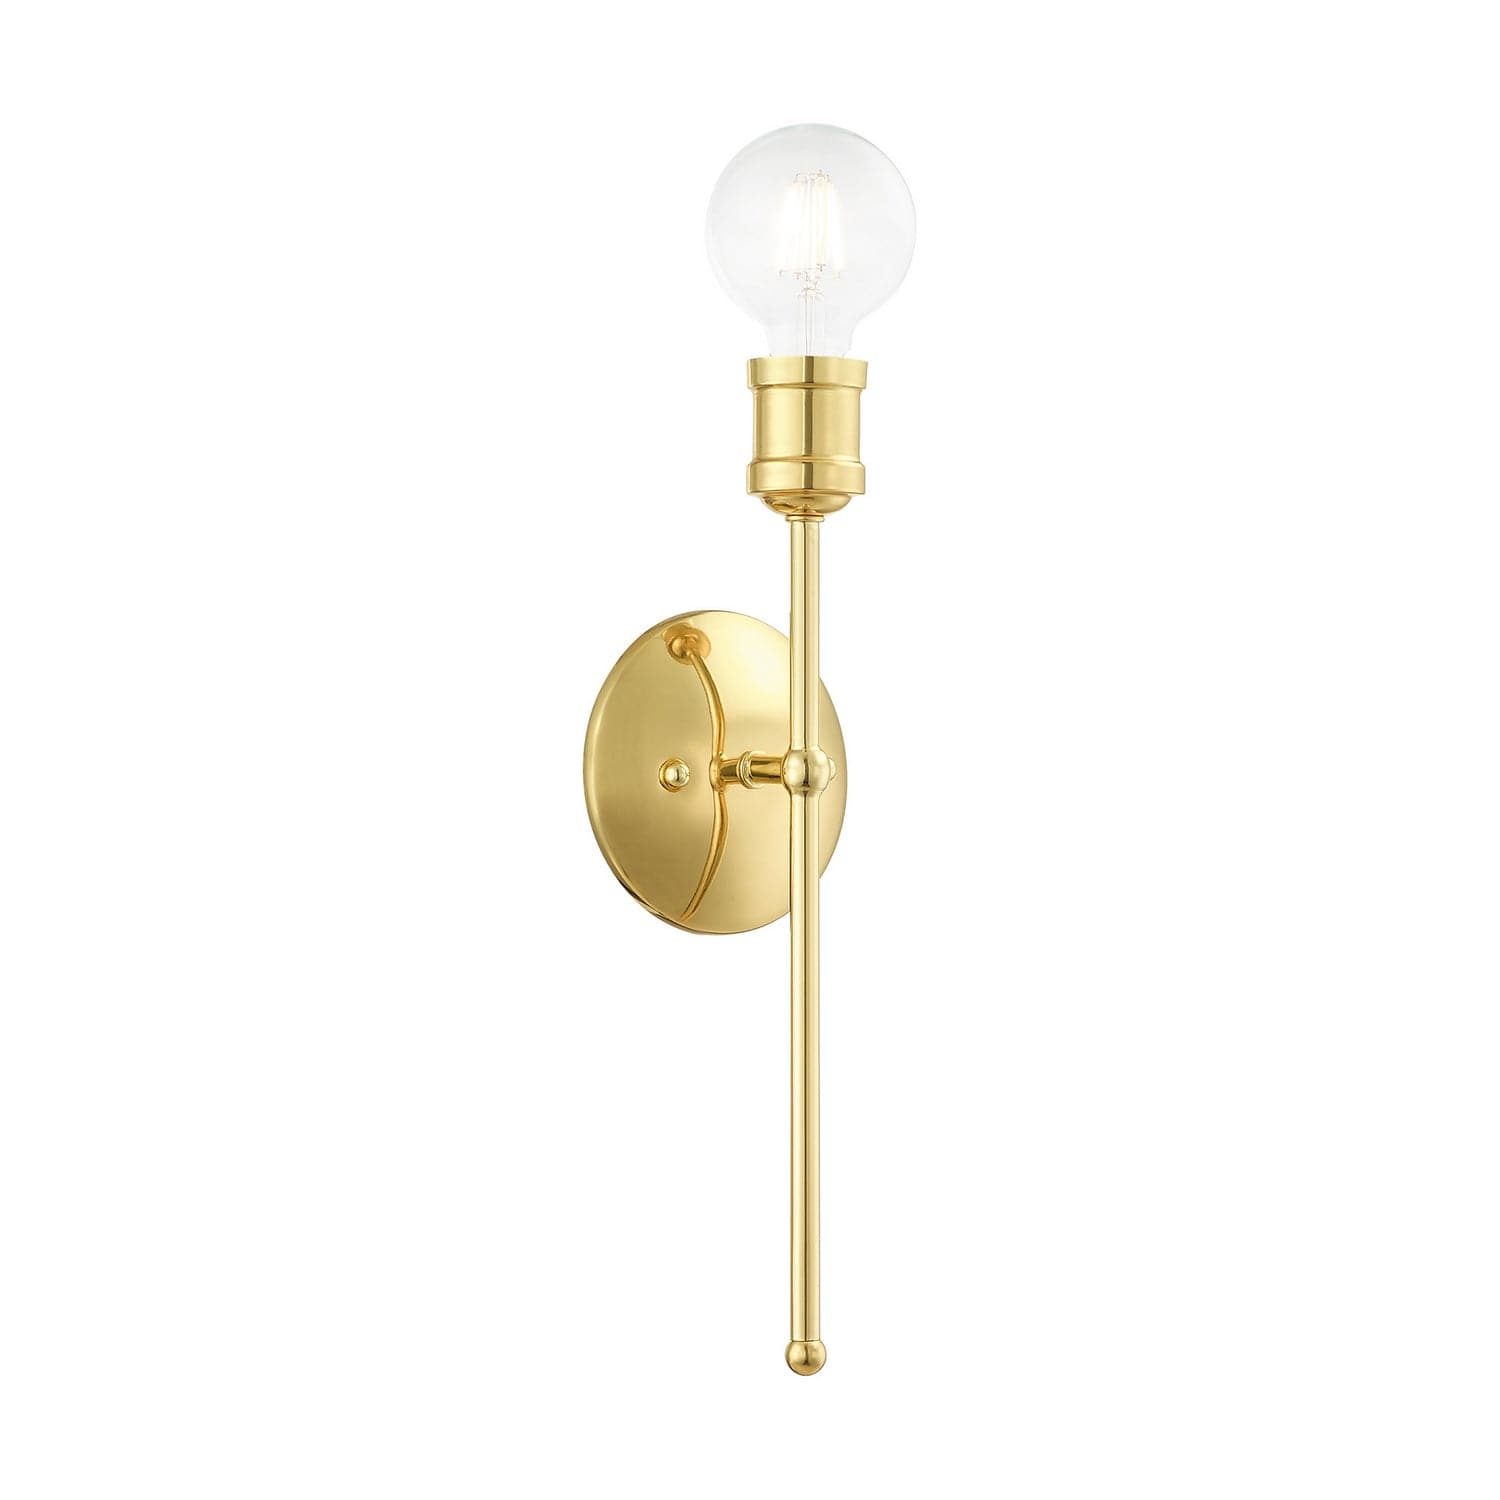 Livex Lighting - 16711-02 - One Light Wall Sconce - Lansdale - Polished Brass